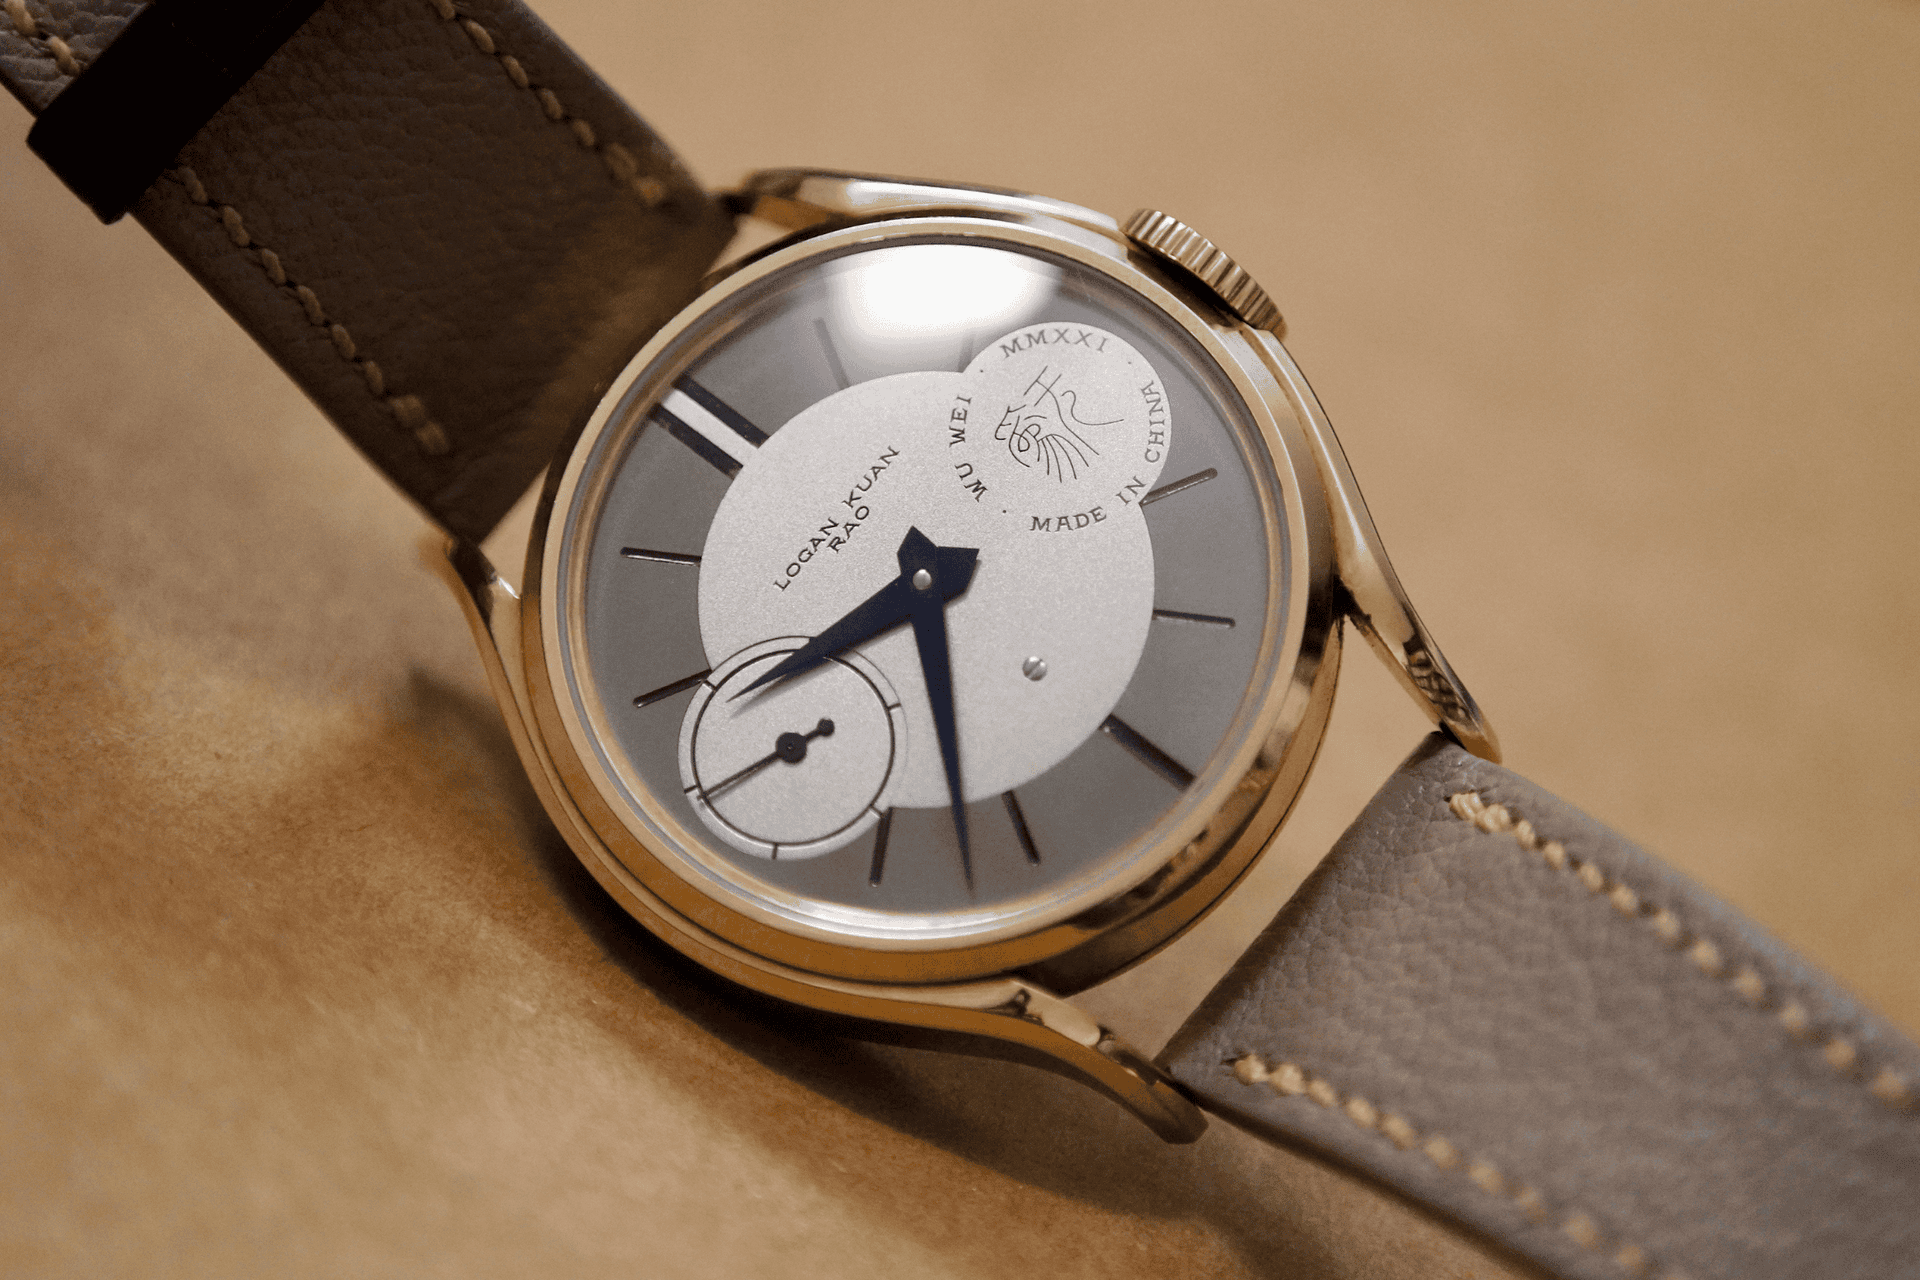 Logan Kuan Rao’s latest upcoming creation is called the Wuwei <无为>, a watch which embodies the philosophical concept of the same name rooted in Taoism